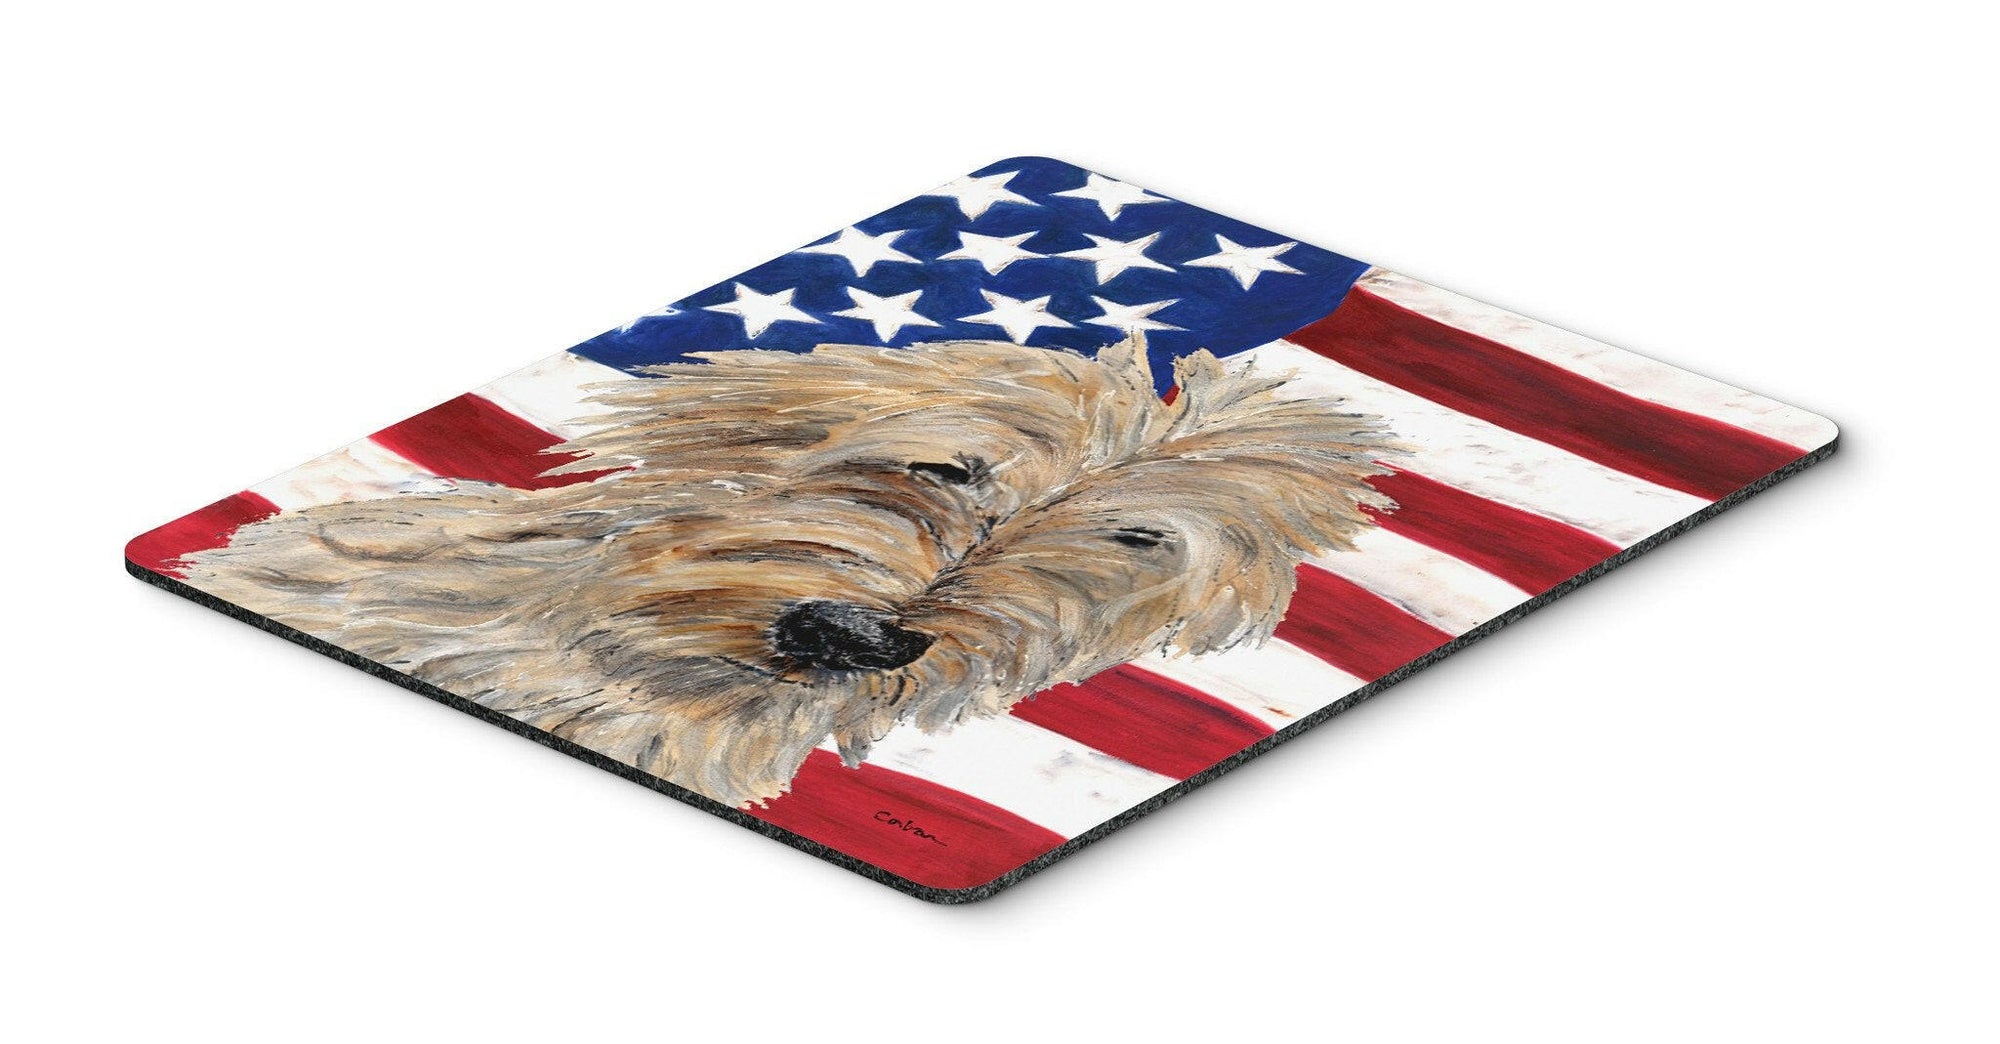 Golden Doodle 2 with American Flag USA Mouse Pad, Hot Pad or Trivet SC9643MP by Caroline's Treasures